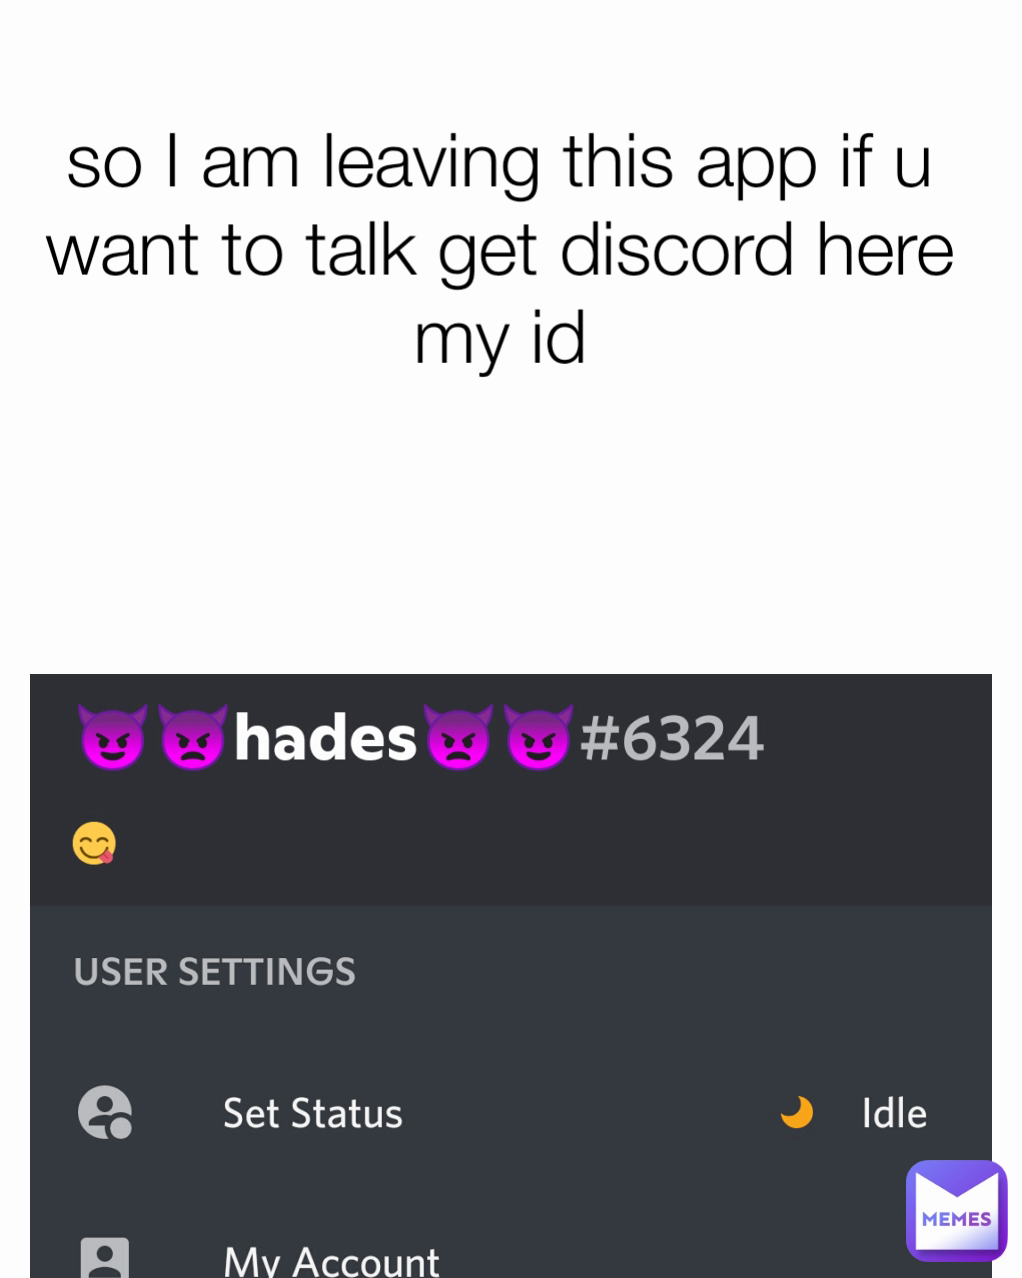 so I am leaving this app if u want to talk get discord here my id